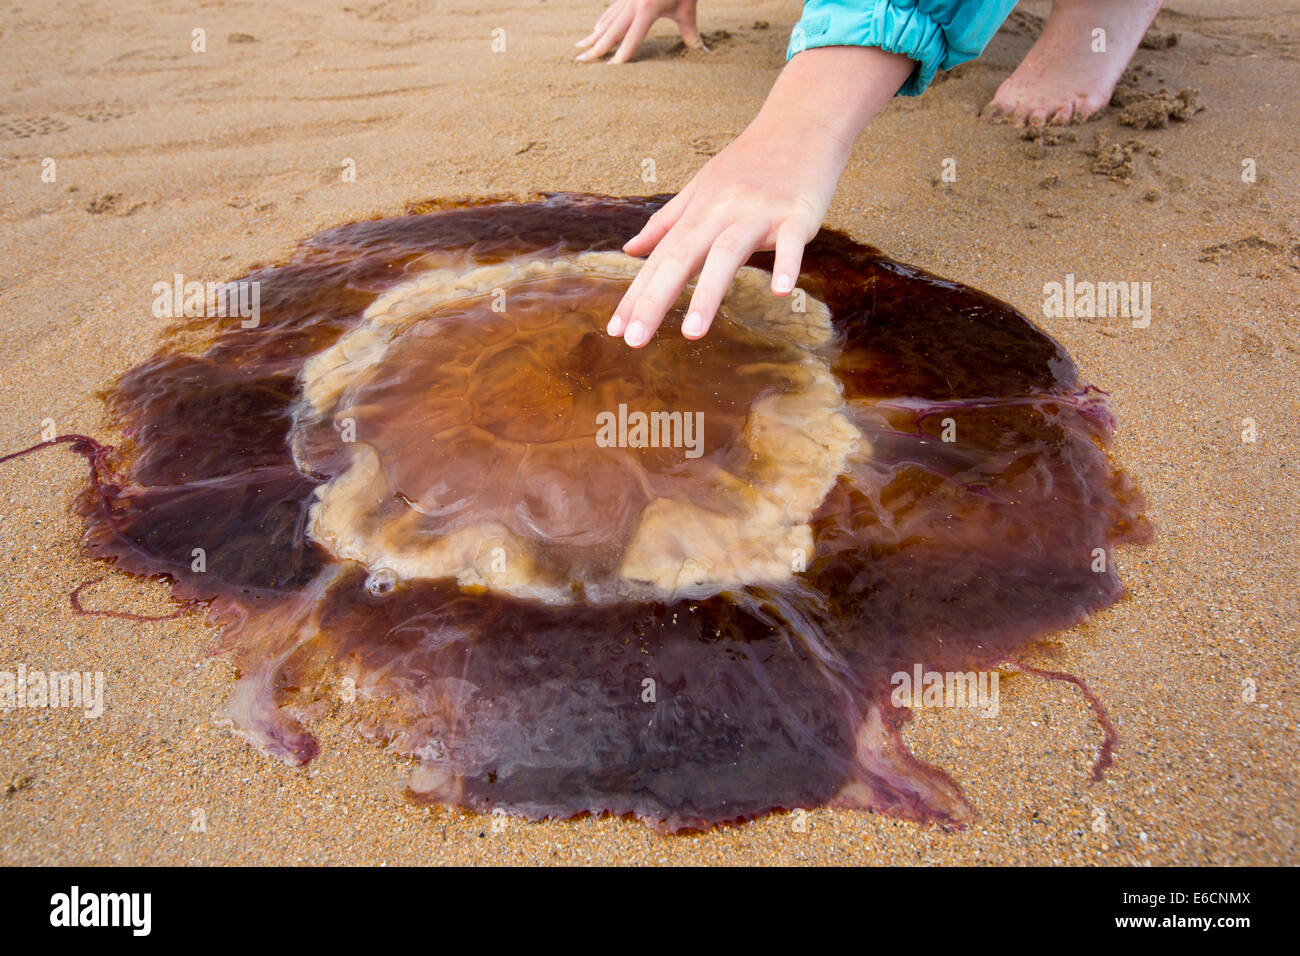 Lions Mane Jellyfish, Cyanea capillata, washed ashore on a Nothumberland Beach. Climate change is causing numbers of Jellyfish to increase around the world. Stock Photo